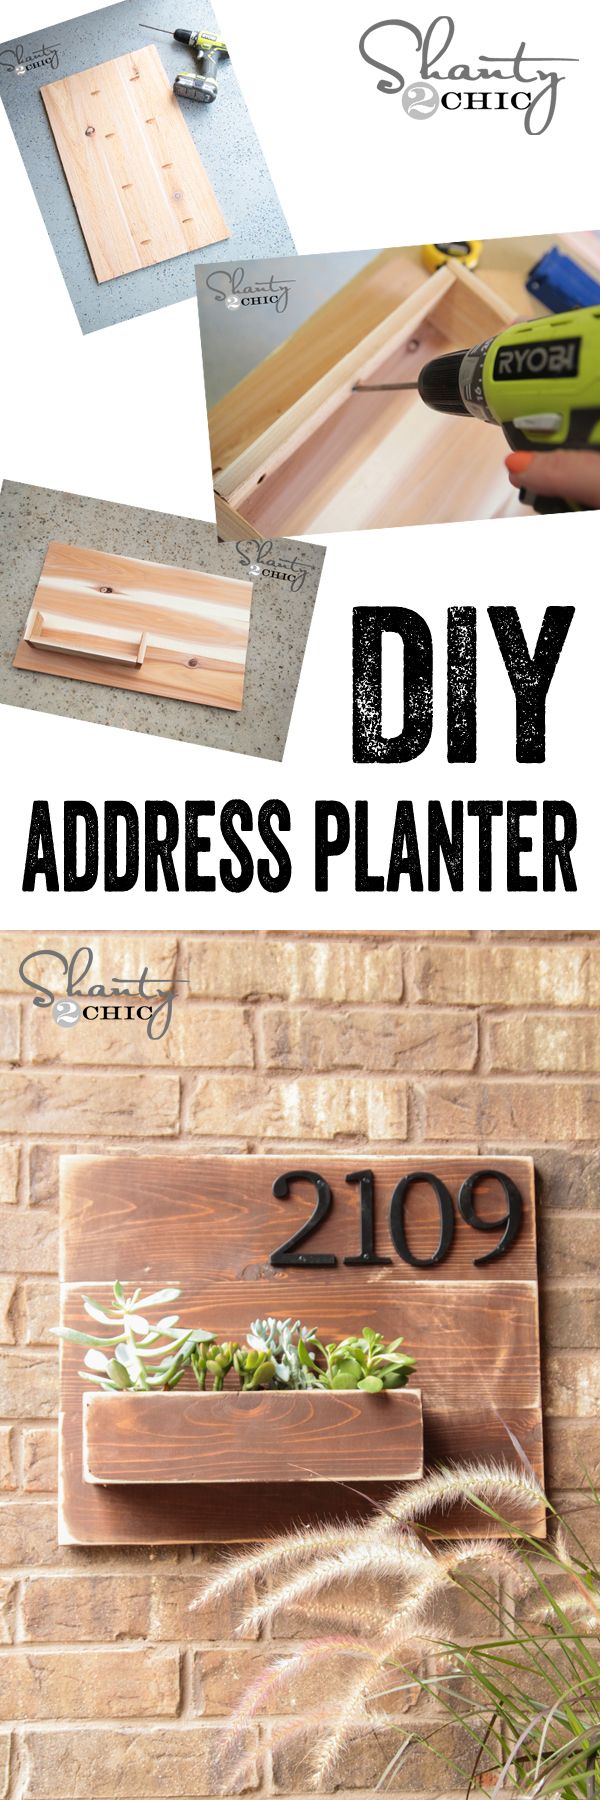 LOVE this wall planter with address numbers... Cheap and easy DIY project! www.s...